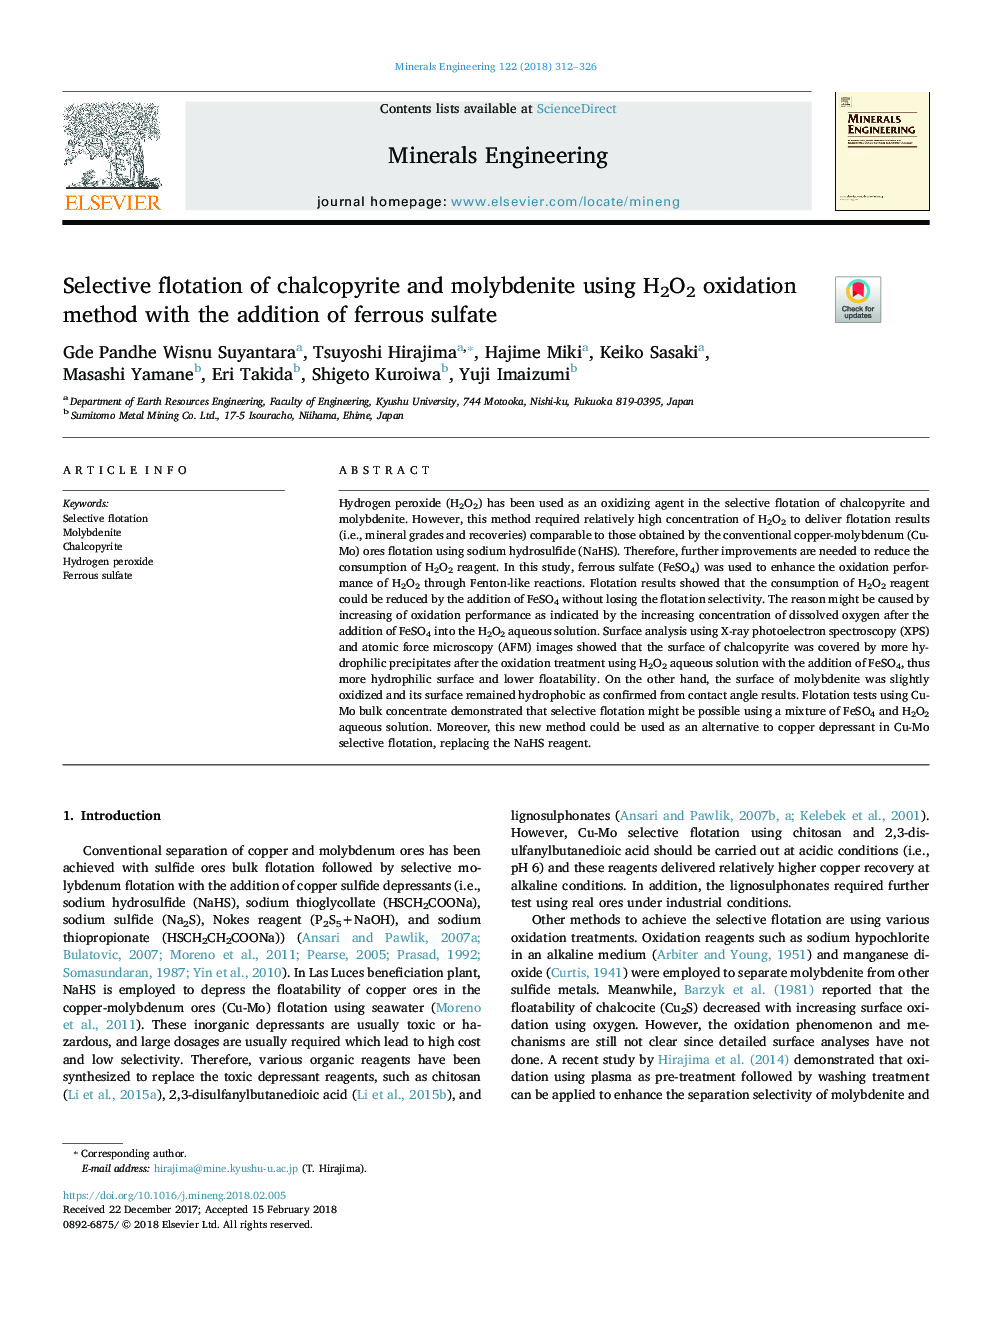 Selective flotation of chalcopyrite and molybdenite using H2O2 oxidation method with the addition of ferrous sulfate